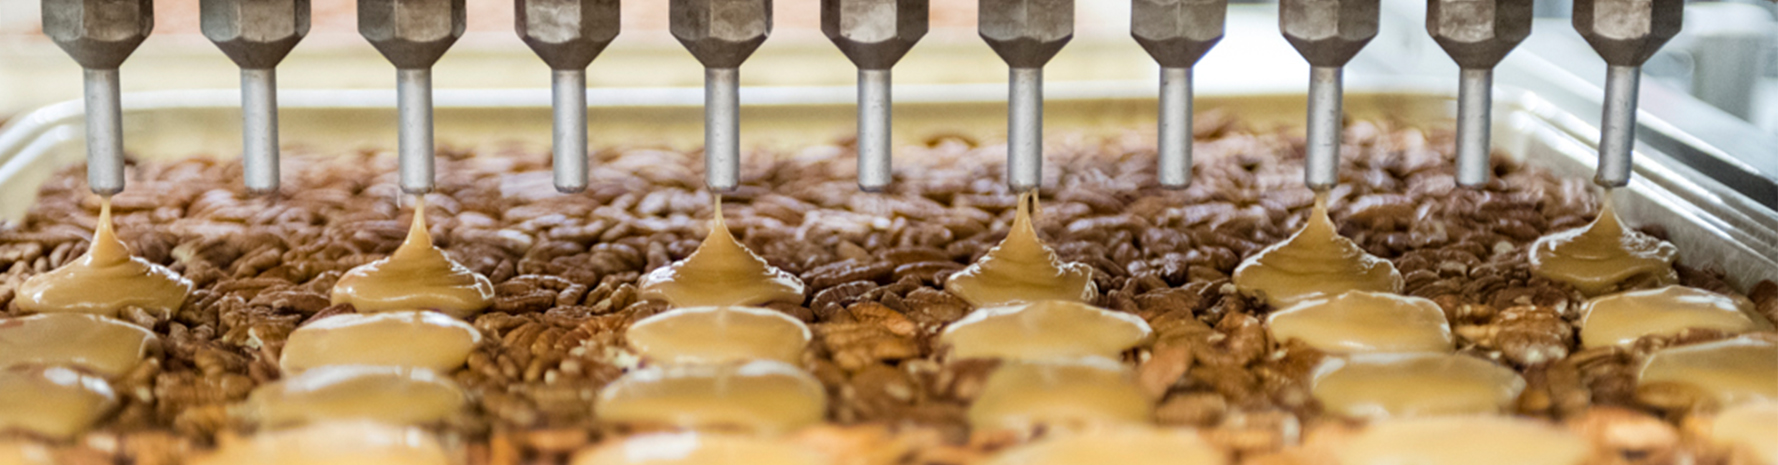 Making caramel clusters in our Vermont chocolate factory